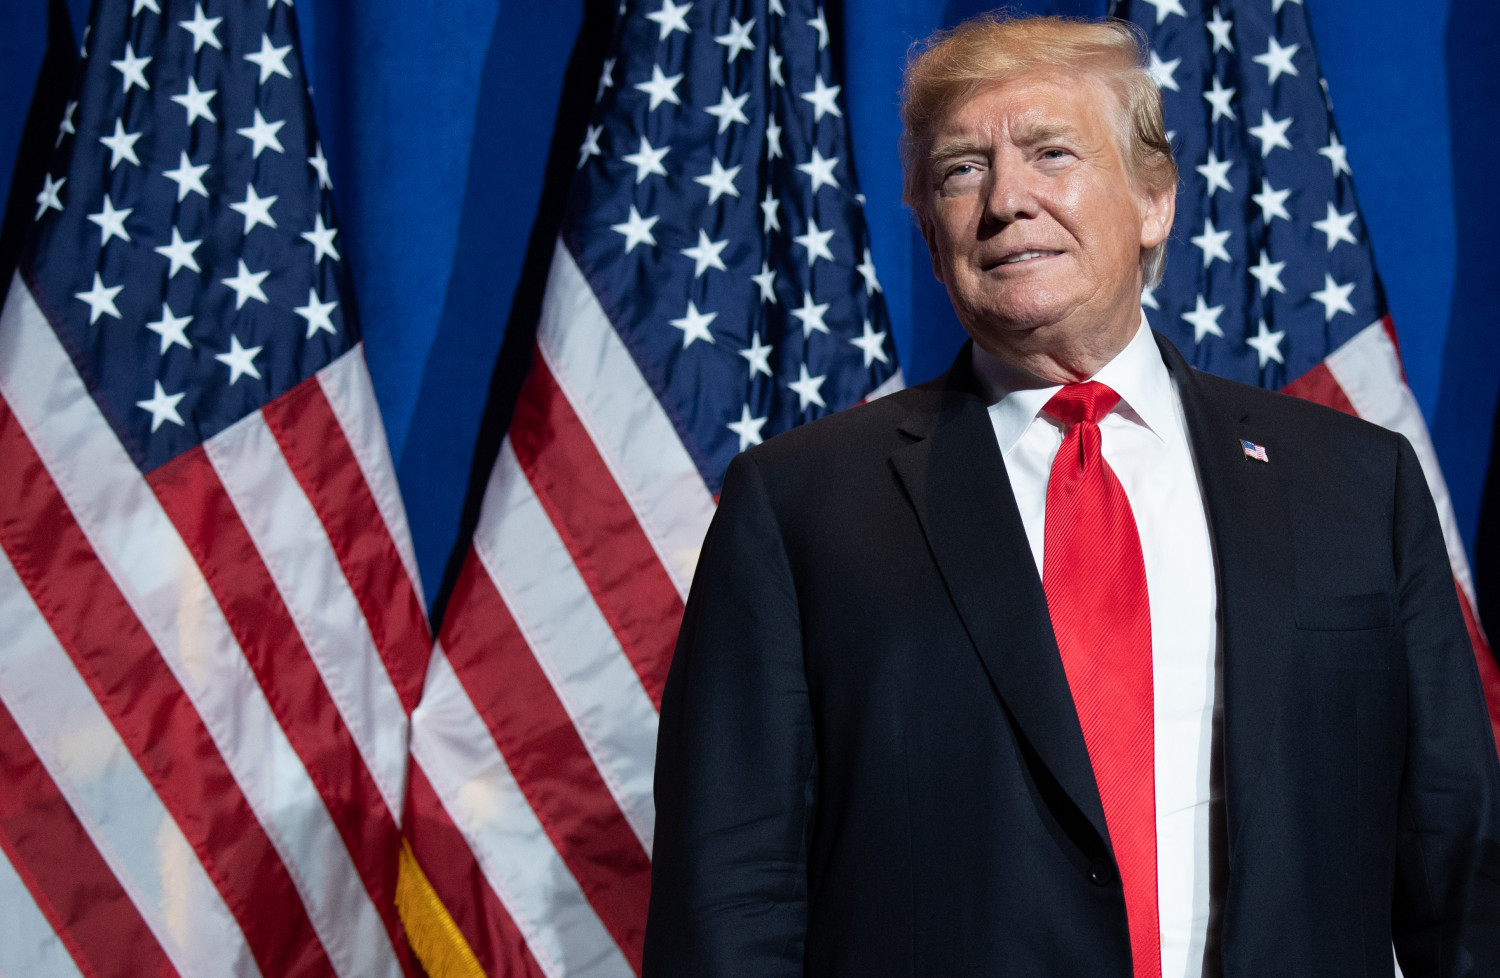 President Trump to Launch His 2020 Re-Election Campaign in Orlando